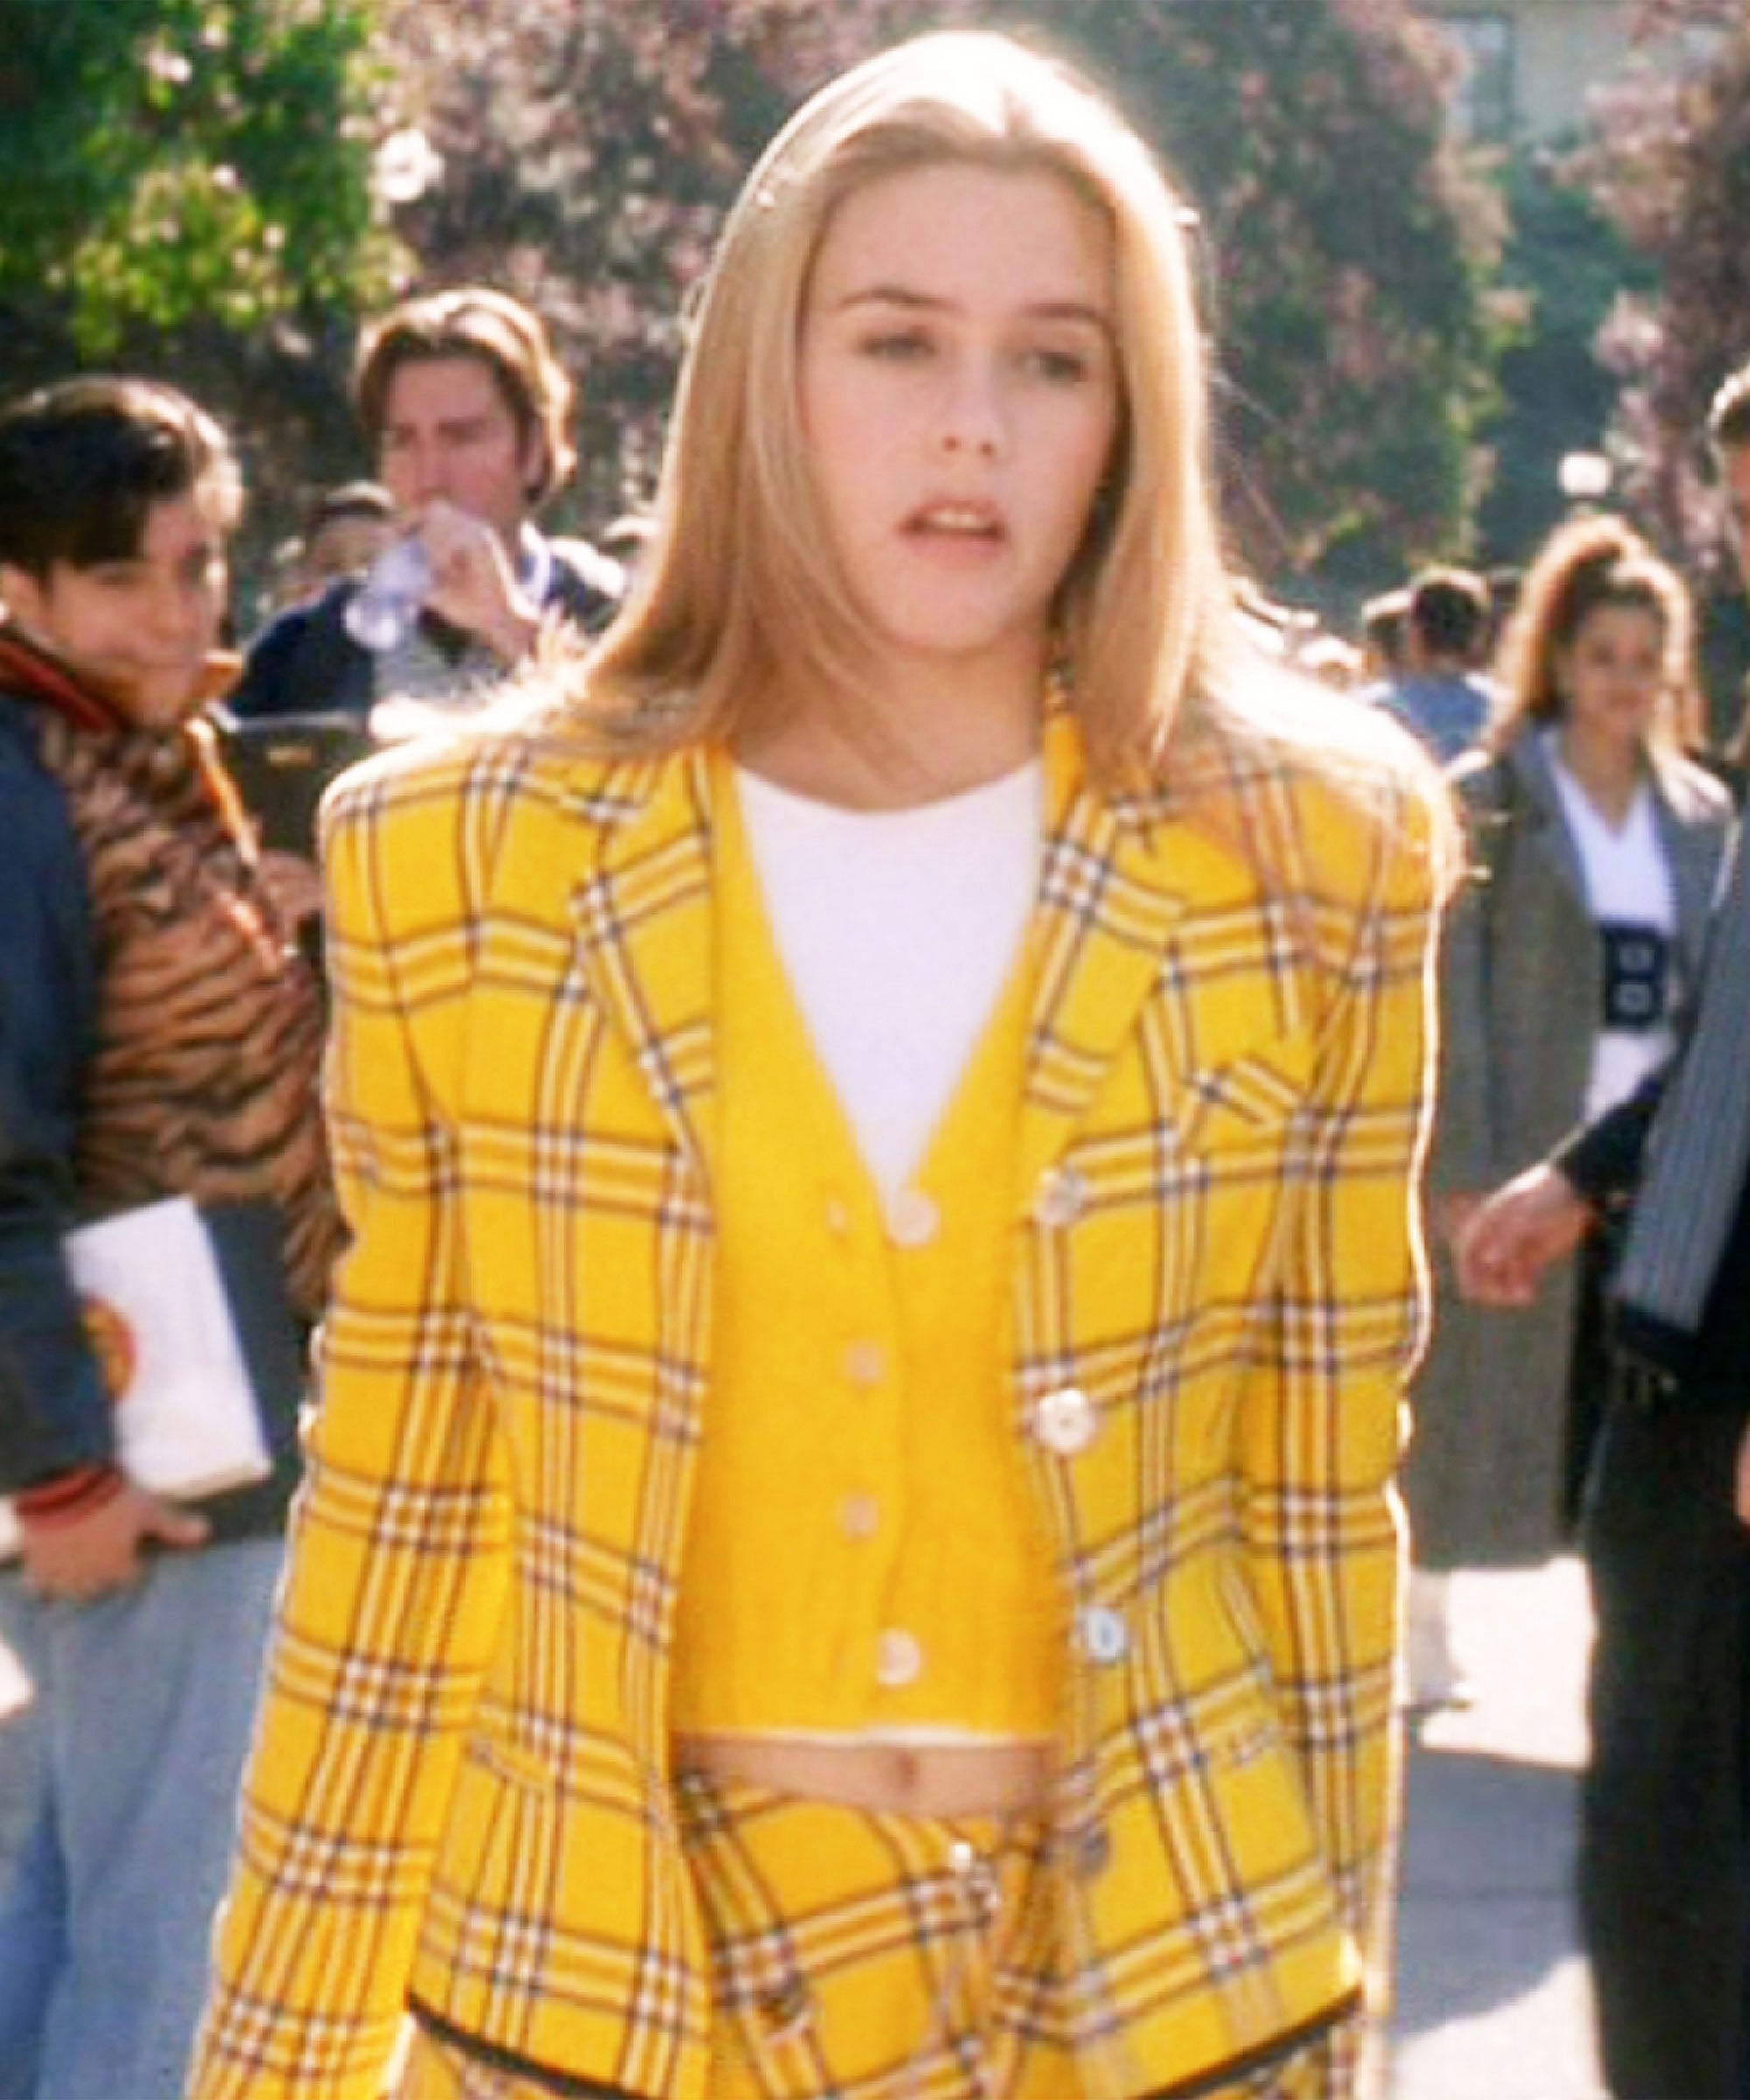 clueless cher yellow outfit